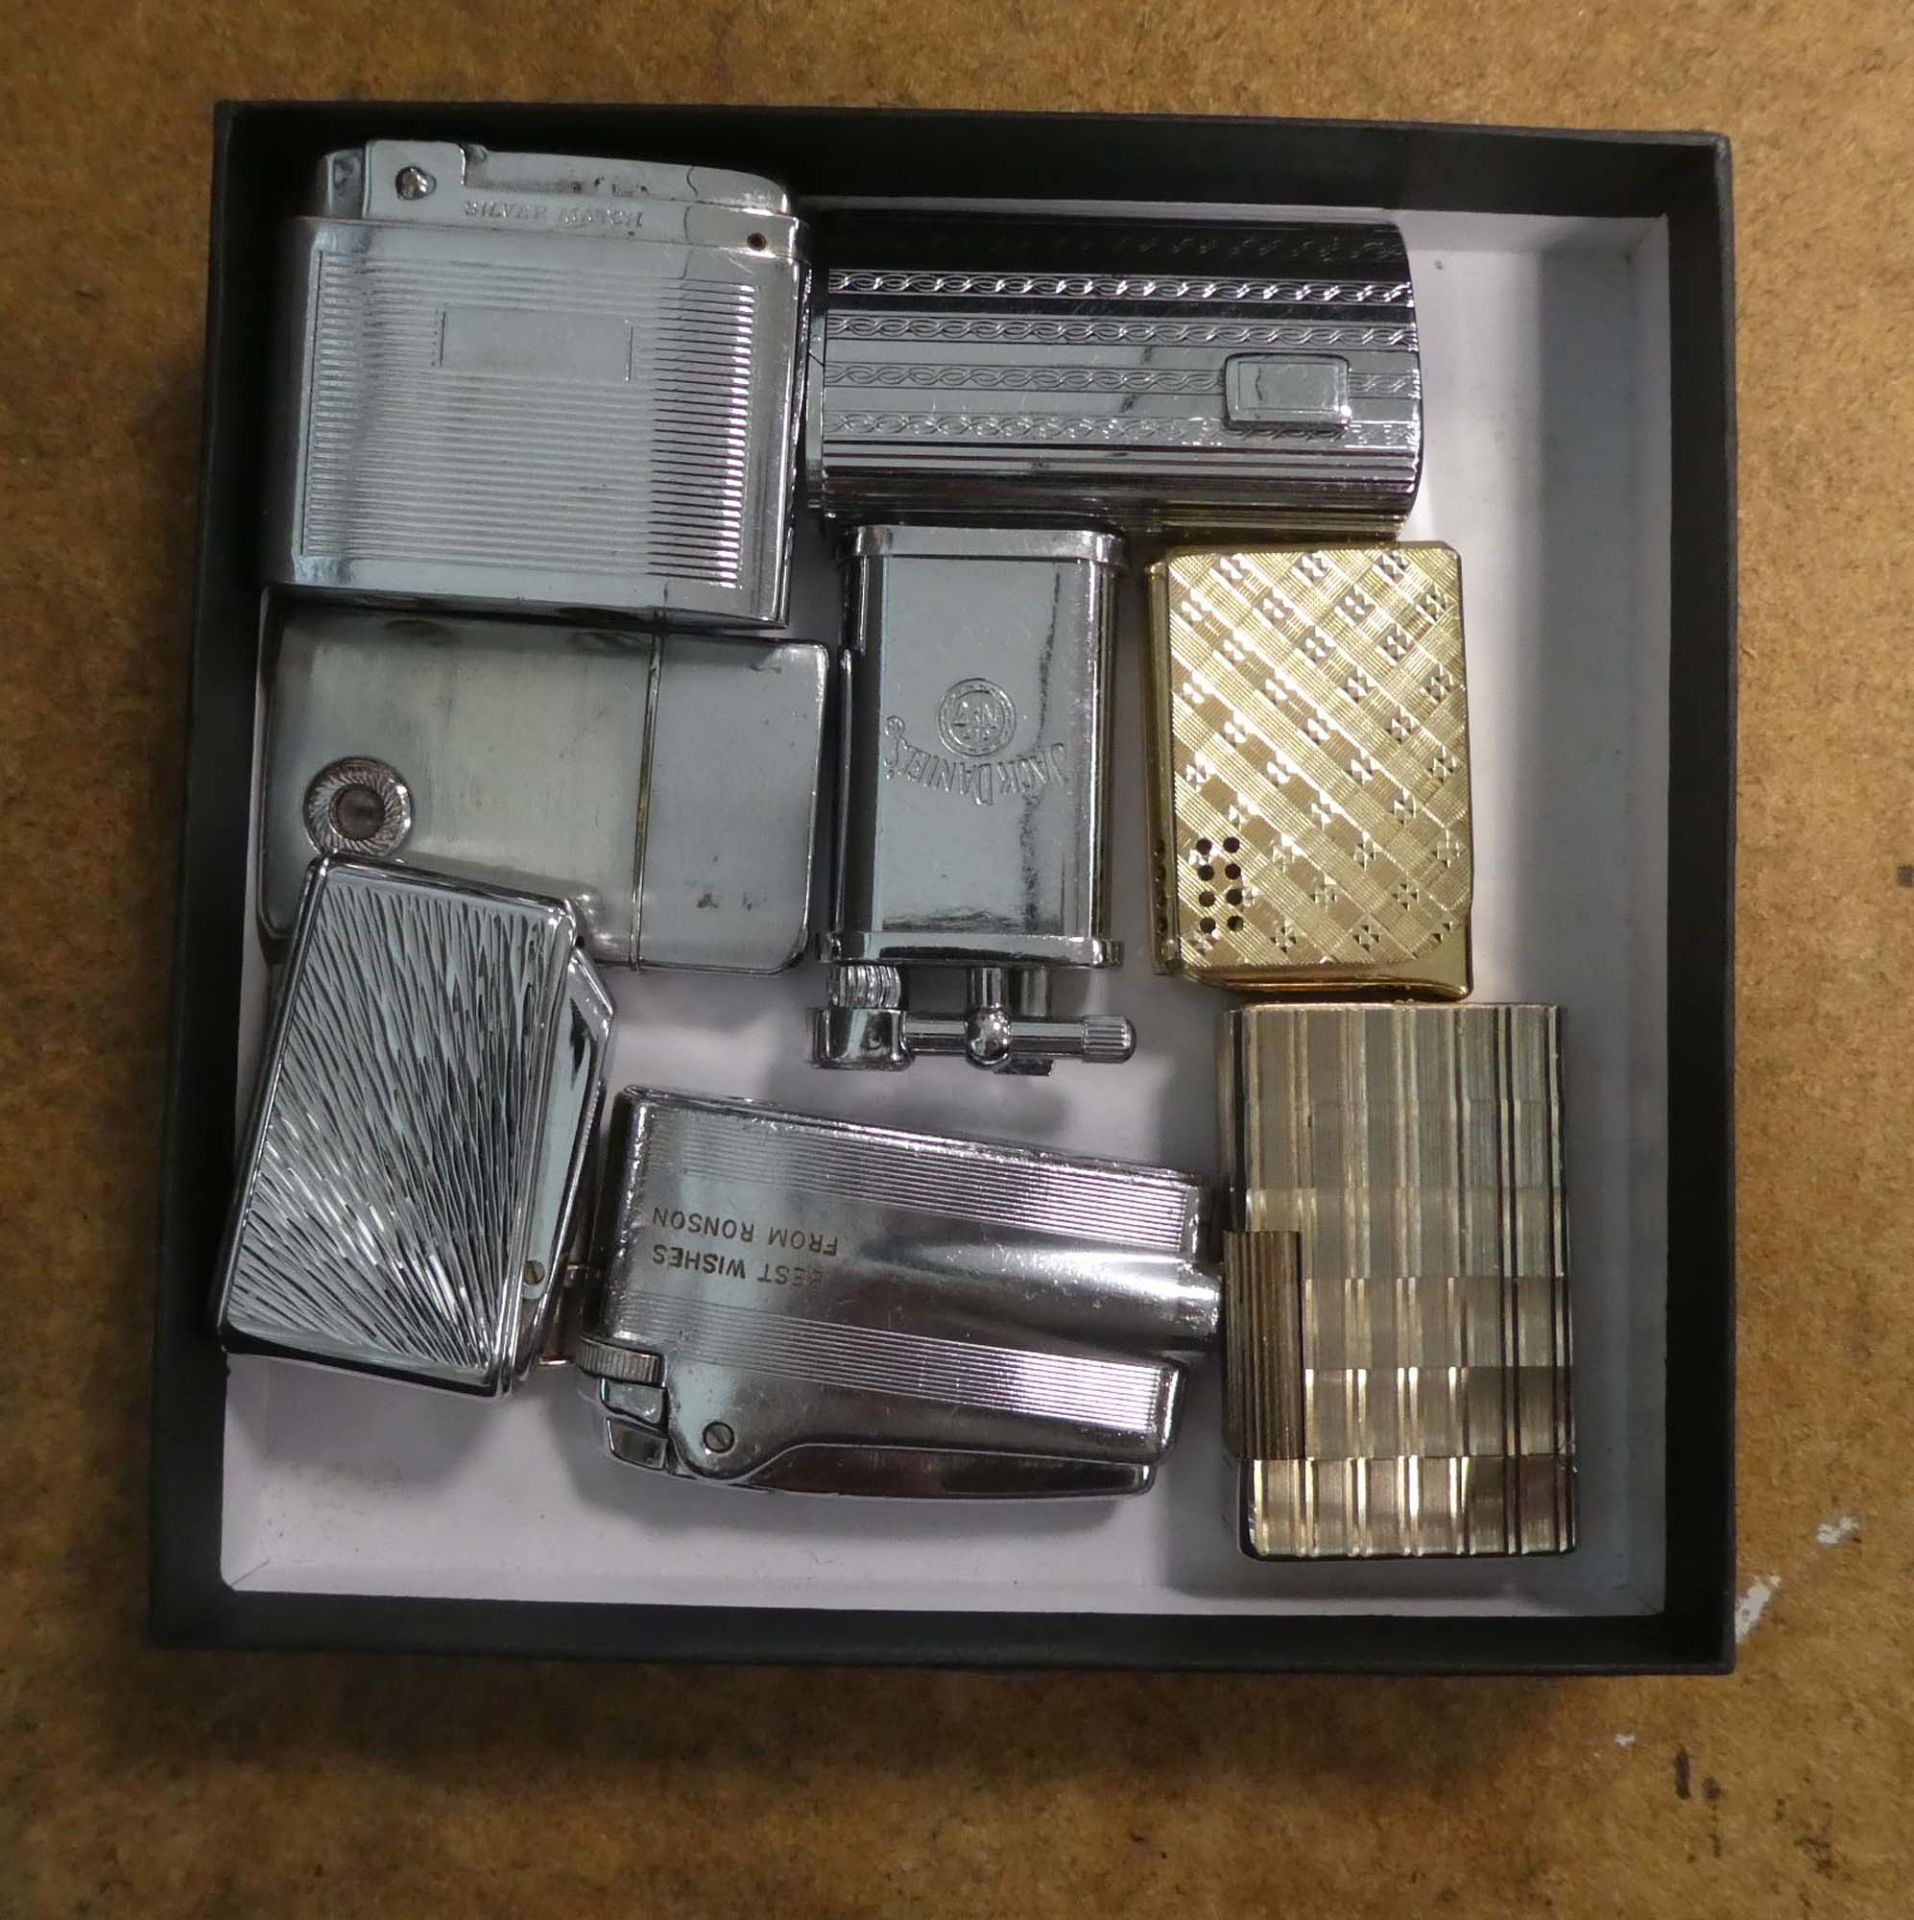 Tray containing various lighters